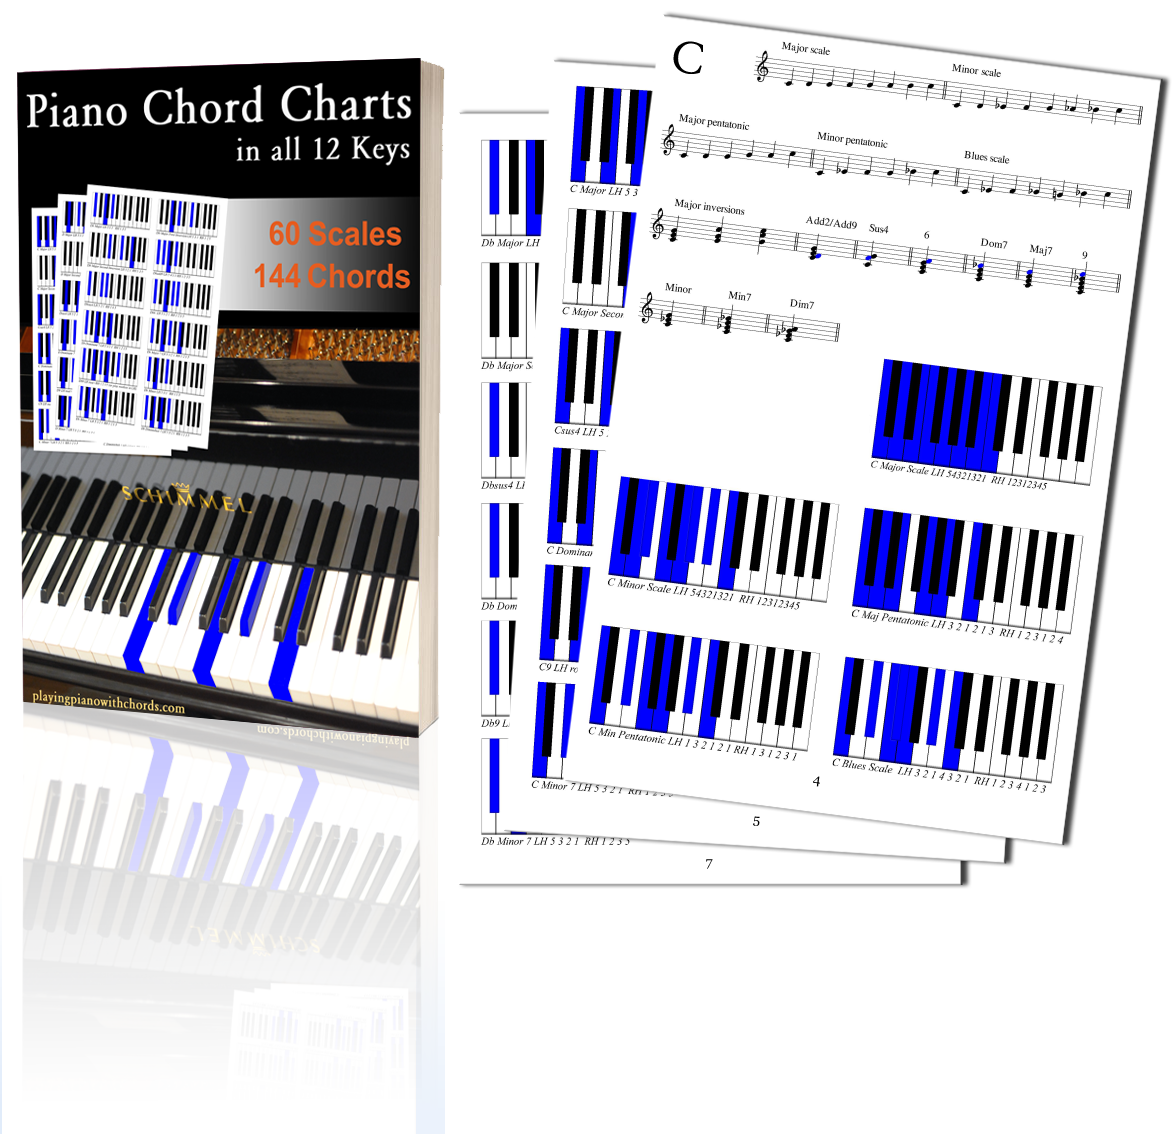 Piano Chord Charts 200 Chords And Scales Get Your Chart For All Keys